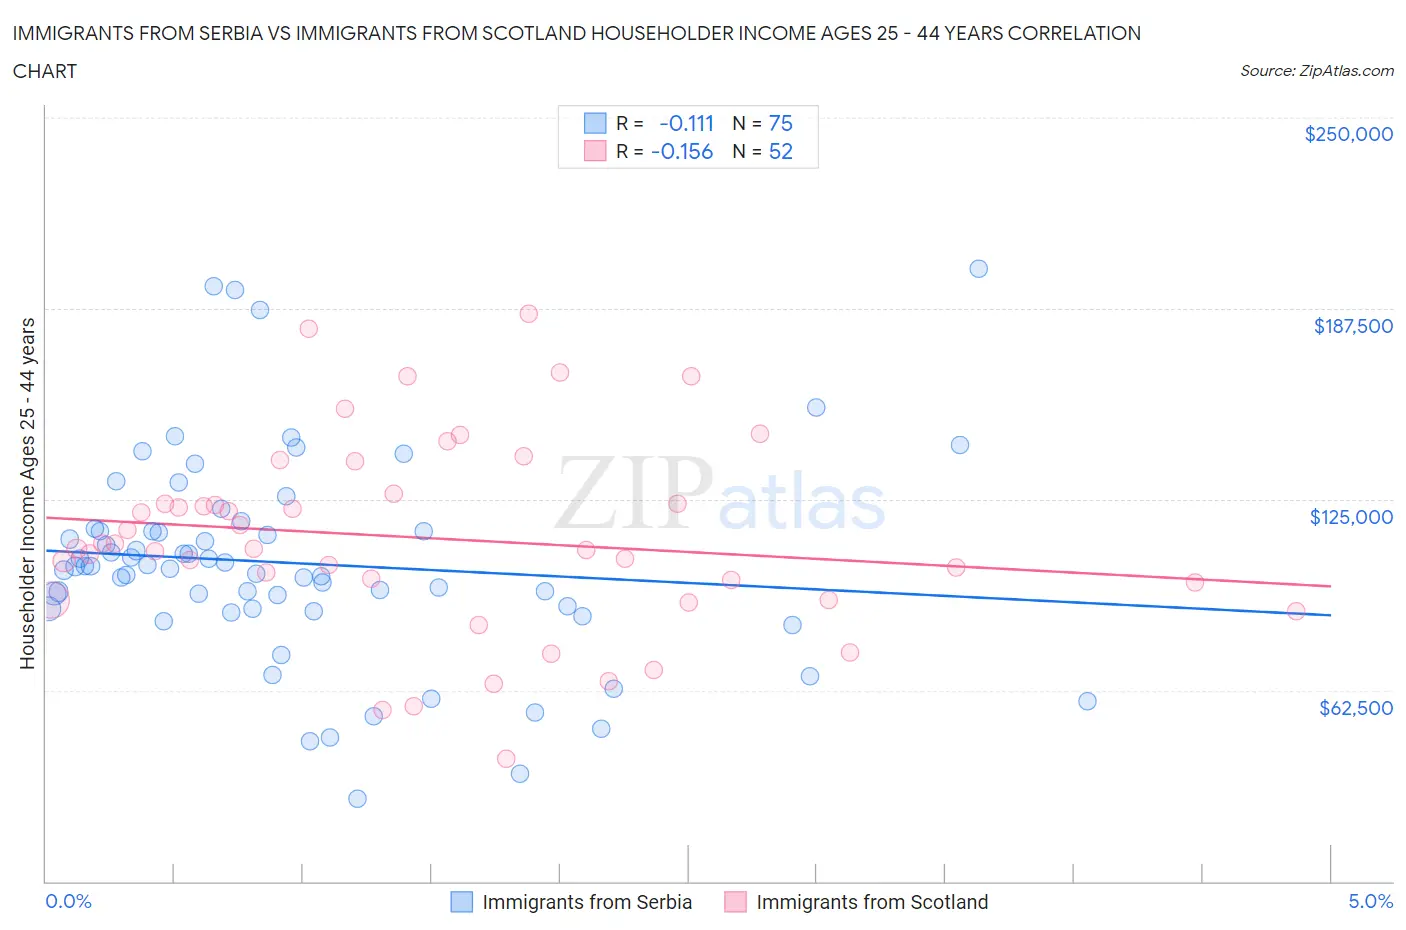 Immigrants from Serbia vs Immigrants from Scotland Householder Income Ages 25 - 44 years